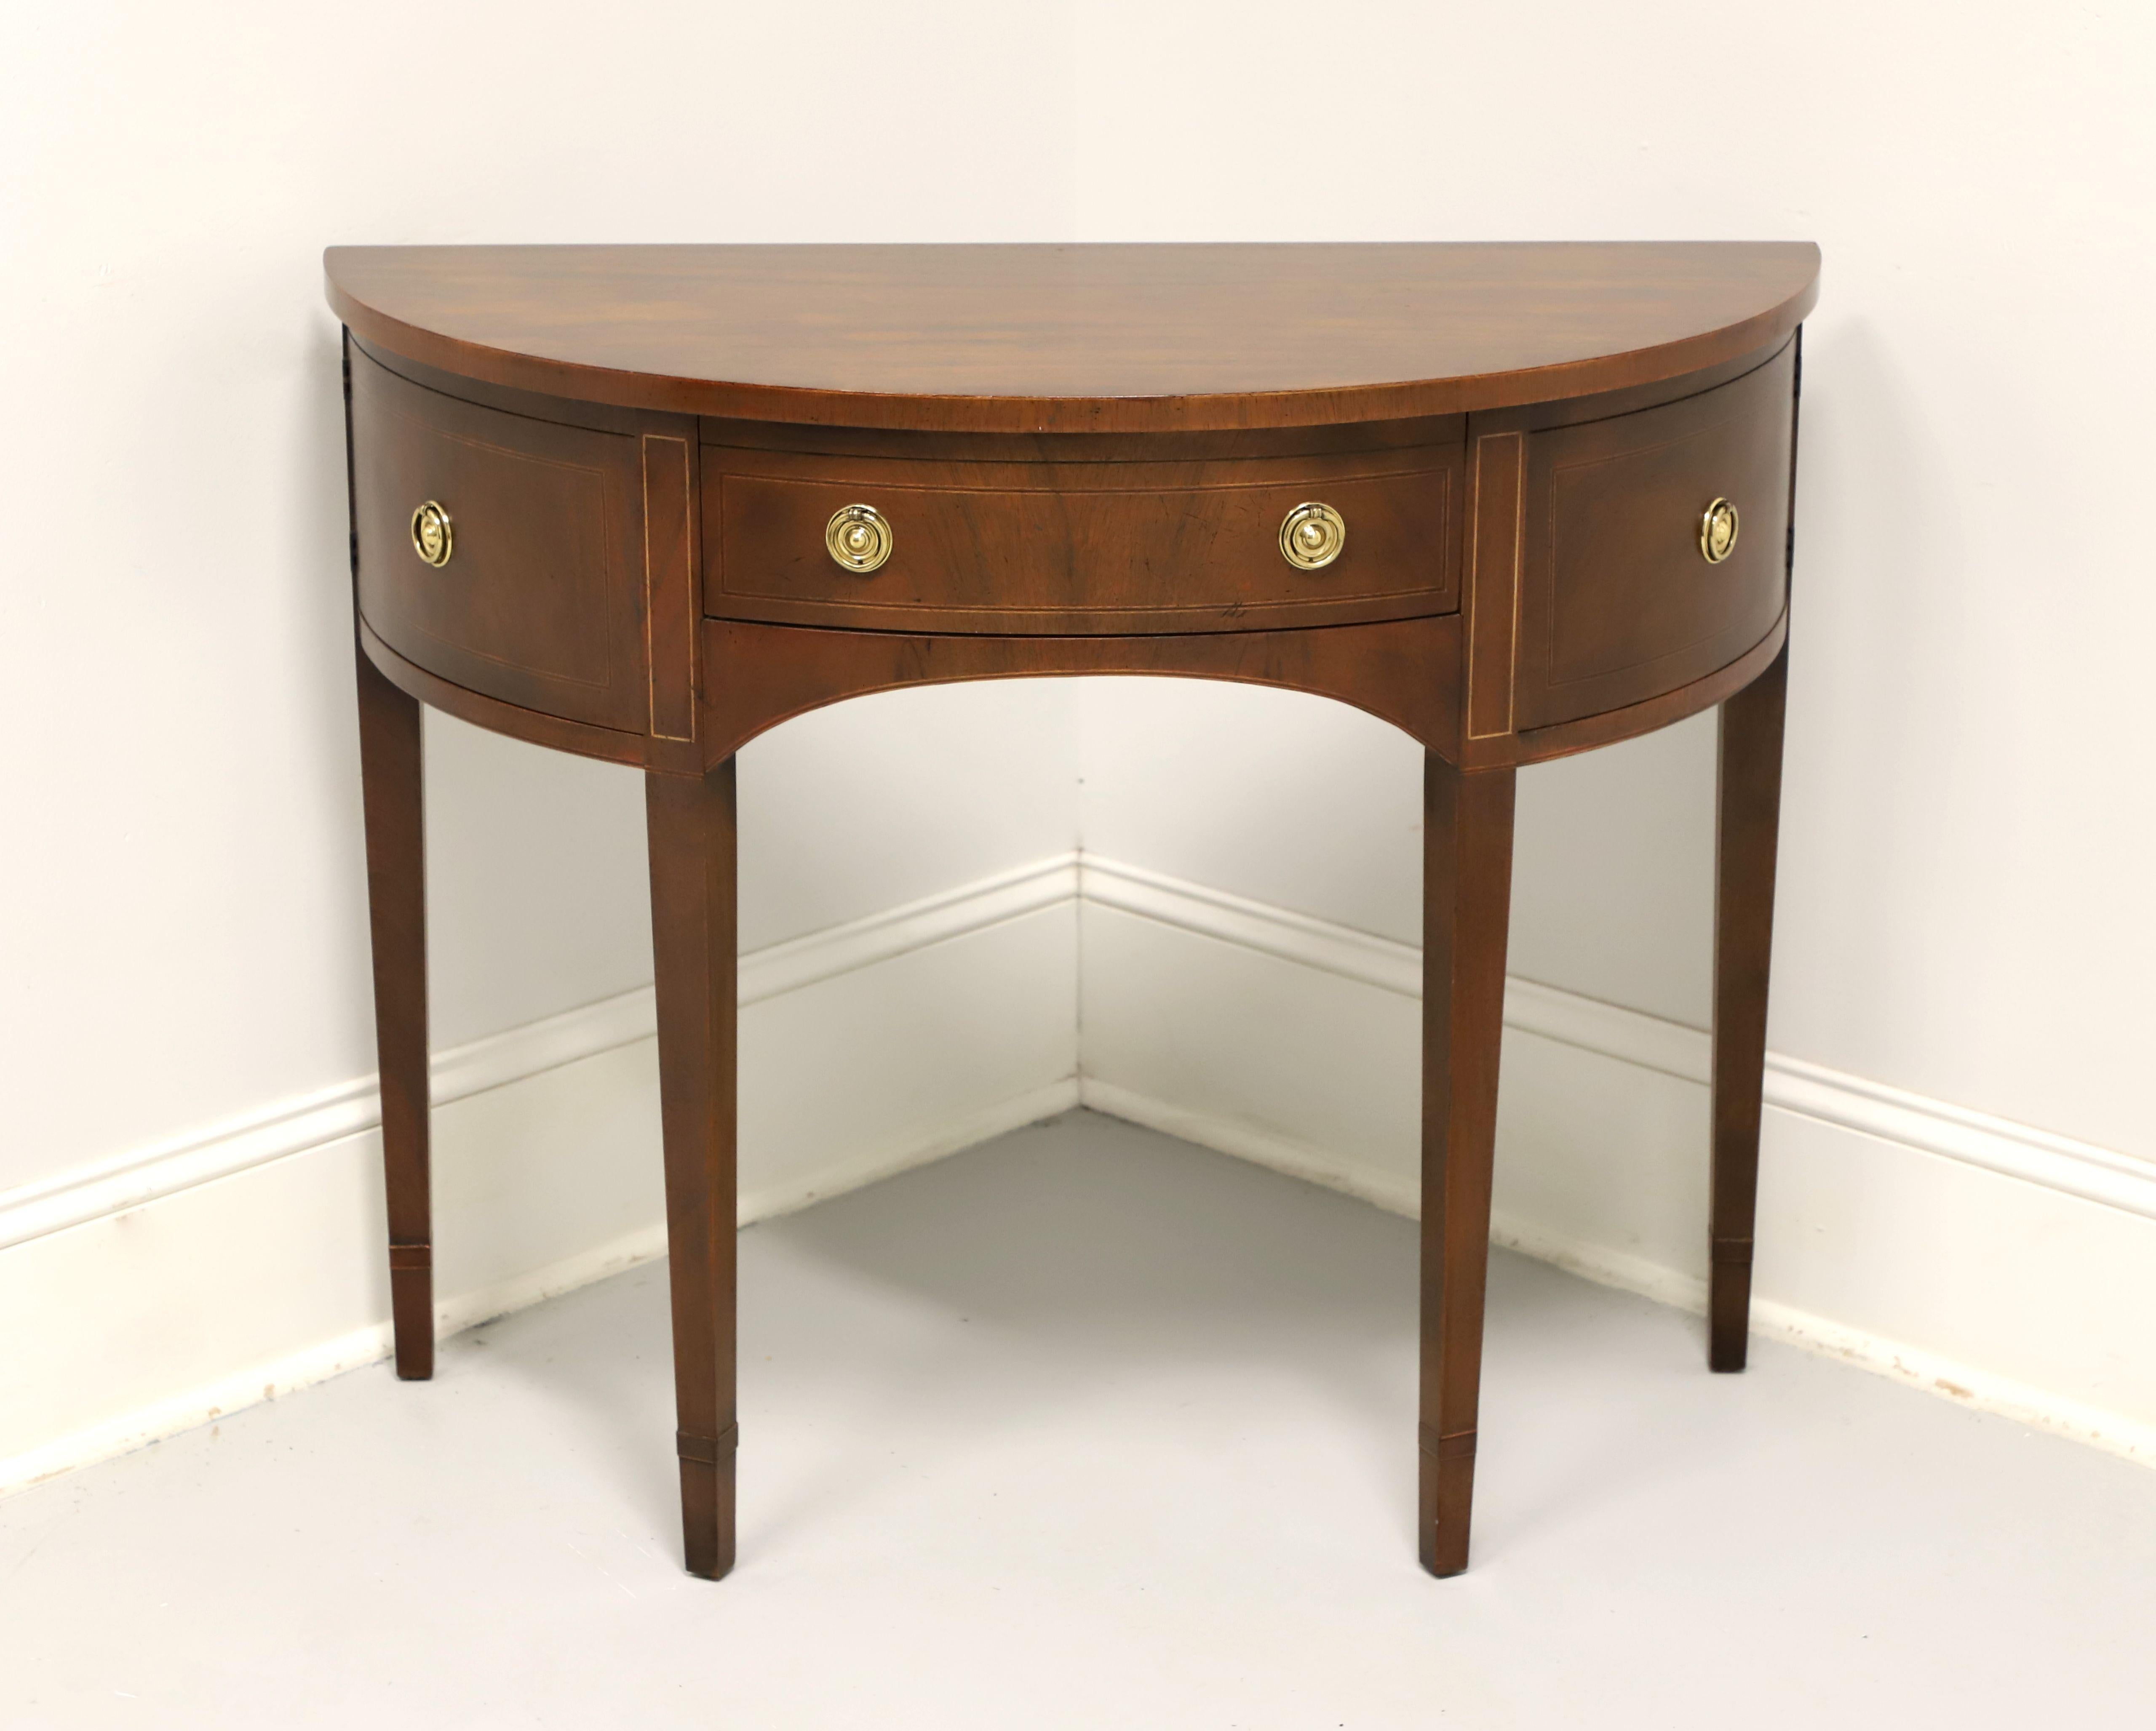 A Hepplewhite style demilune console table or server by top-quality furniture maker Baker Furniture. Mahogany with smooth edge to top, inlays to doors, drawer & top of legs, arched apron, and straight tapered legs. Features a center drawer of